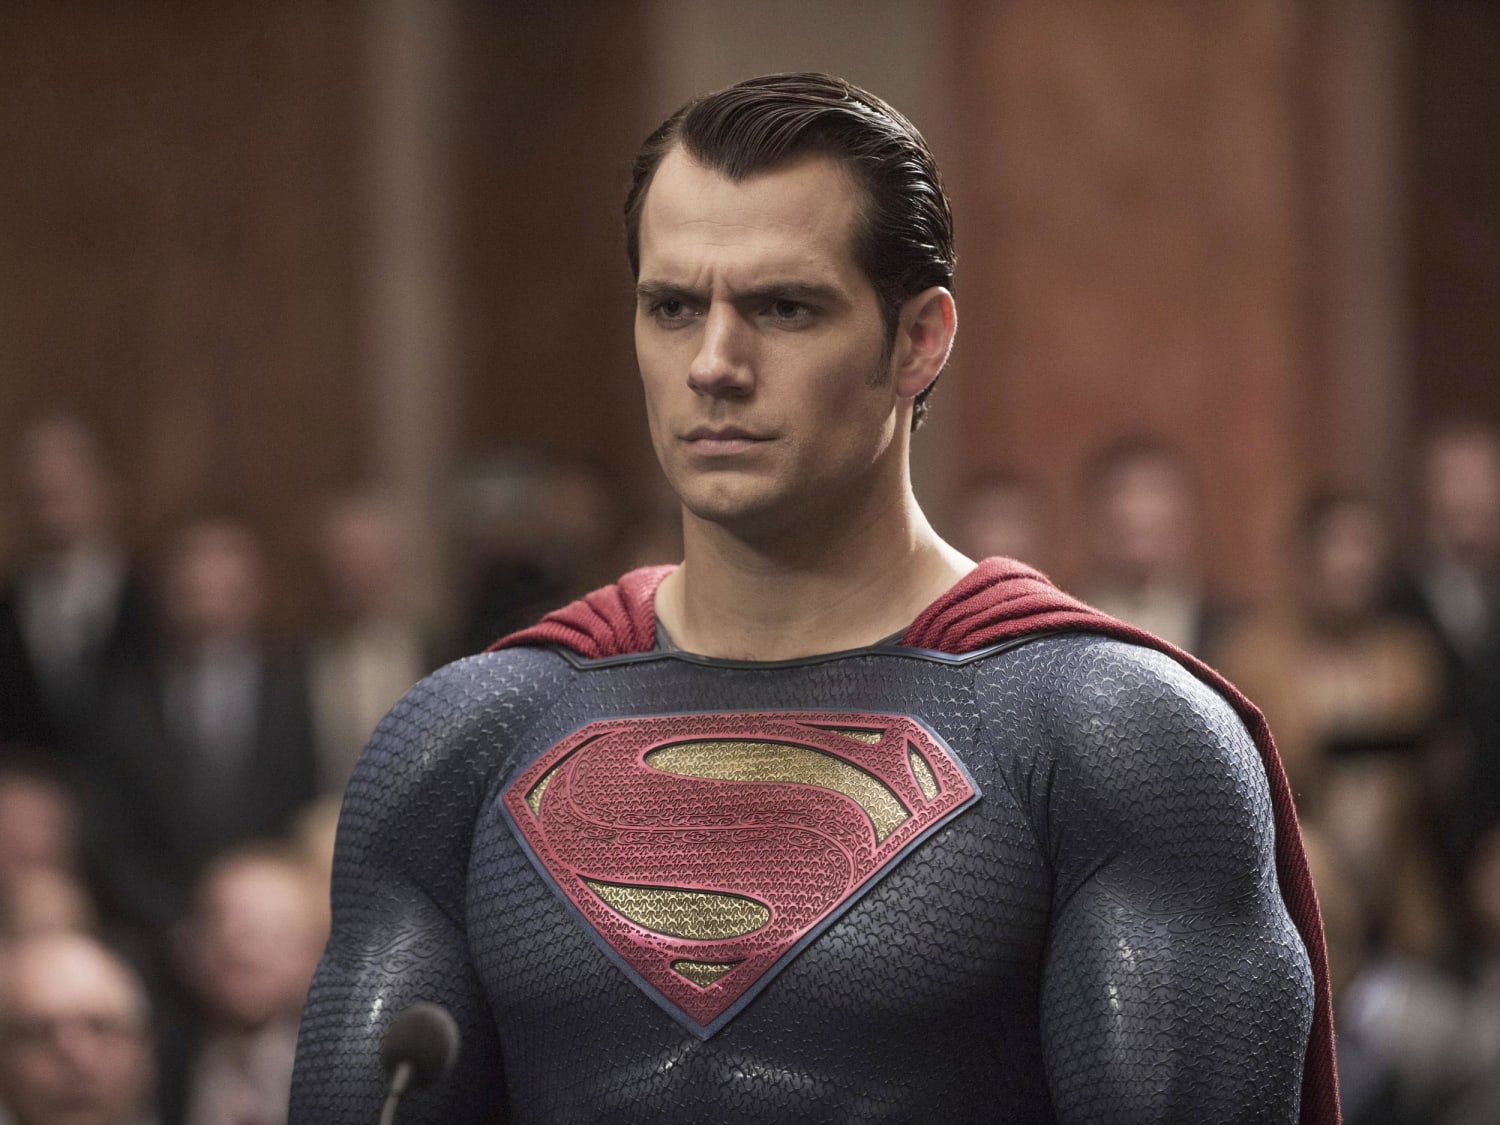 Henry Cavill in talks to return as Superman in upcoming DC Comics film